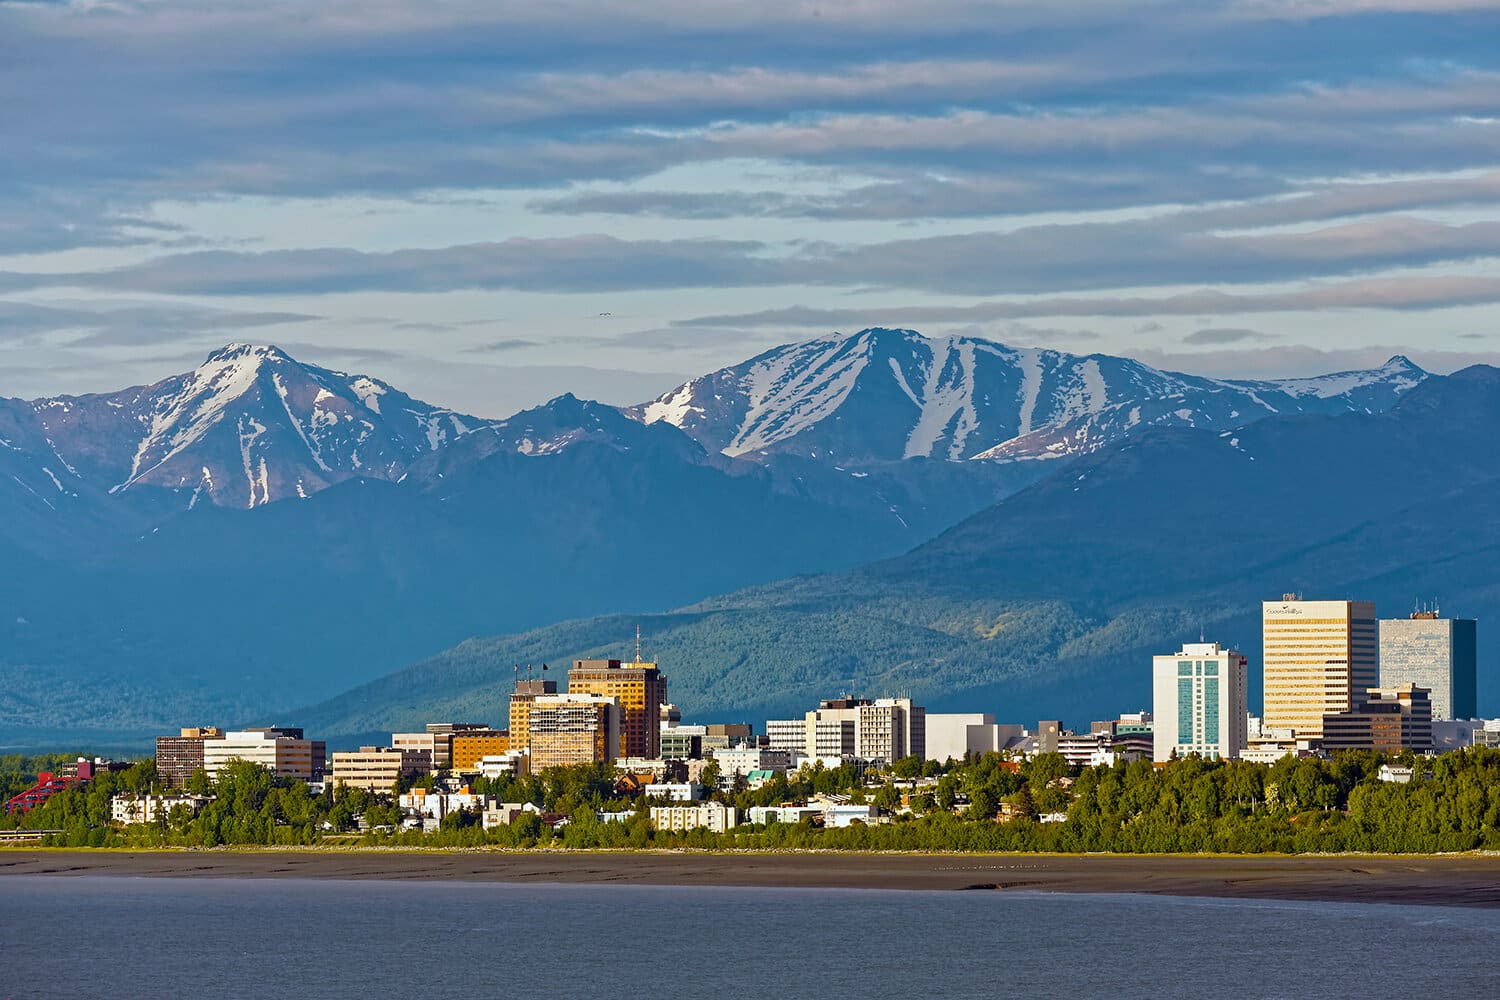 9-facts-about-prominent-industries-and-economic-development-in-anchorage-alaska